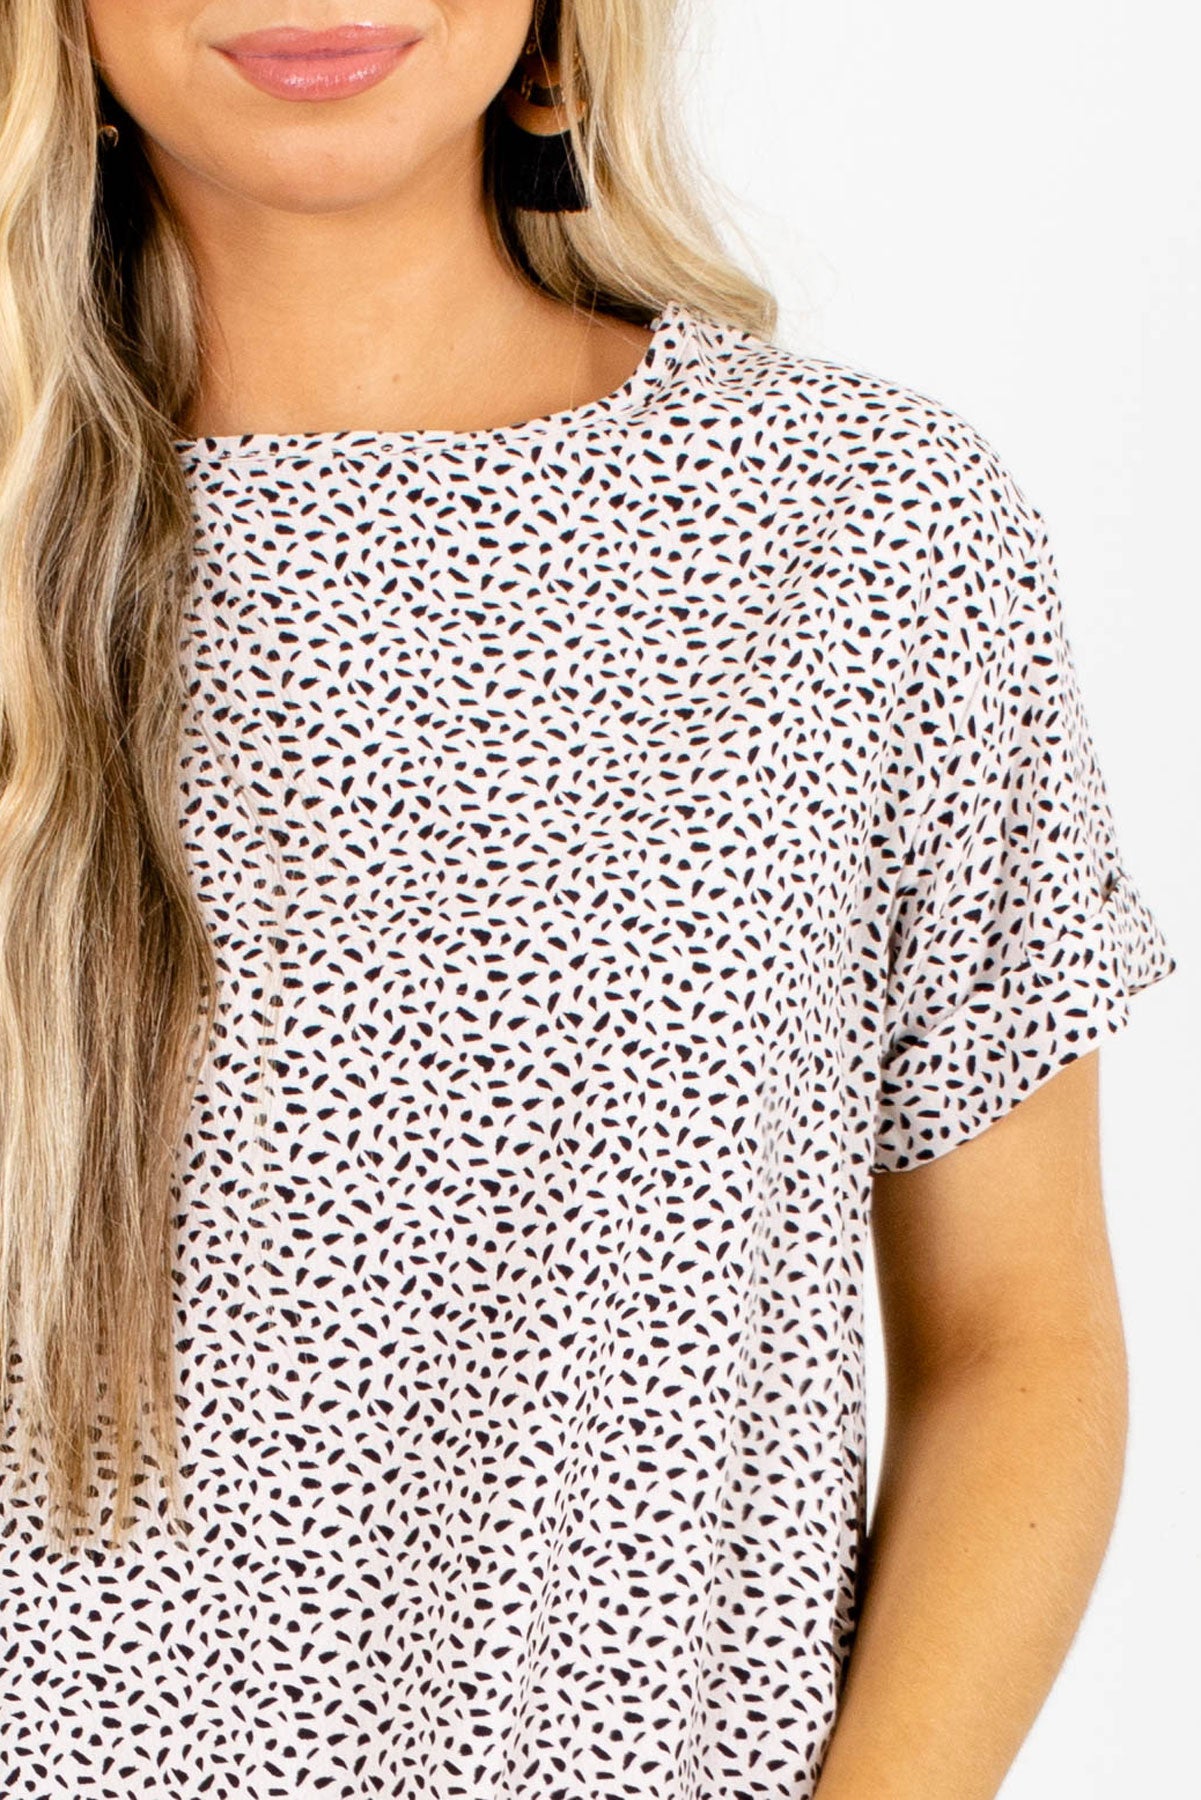 Patterned Design on White Boutique Top